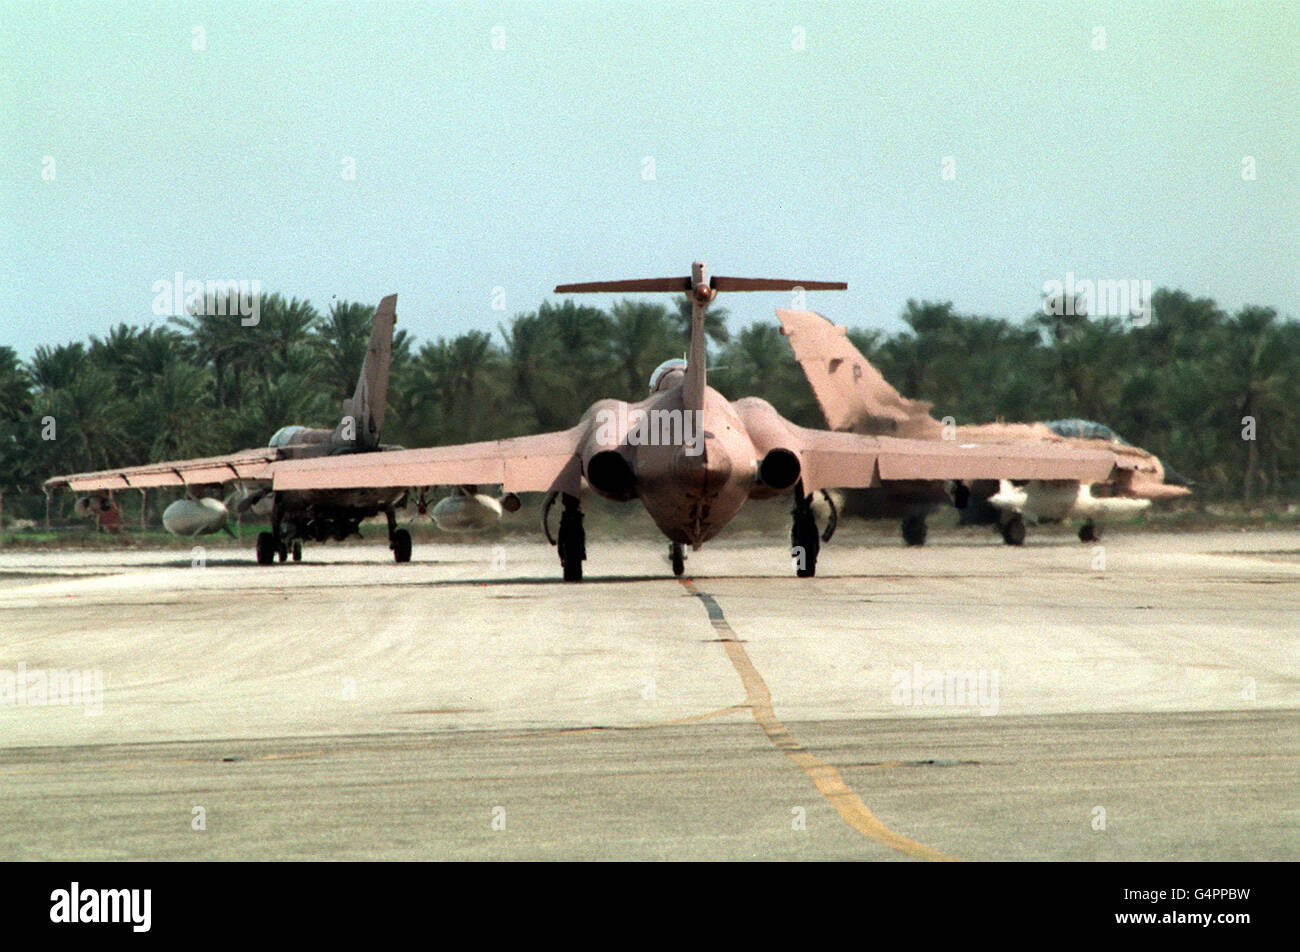 A Buccaneer (center) and two Tornados prepare to take off for their first mission together in the Gulf. Picture dated February 1991. Stock Photo